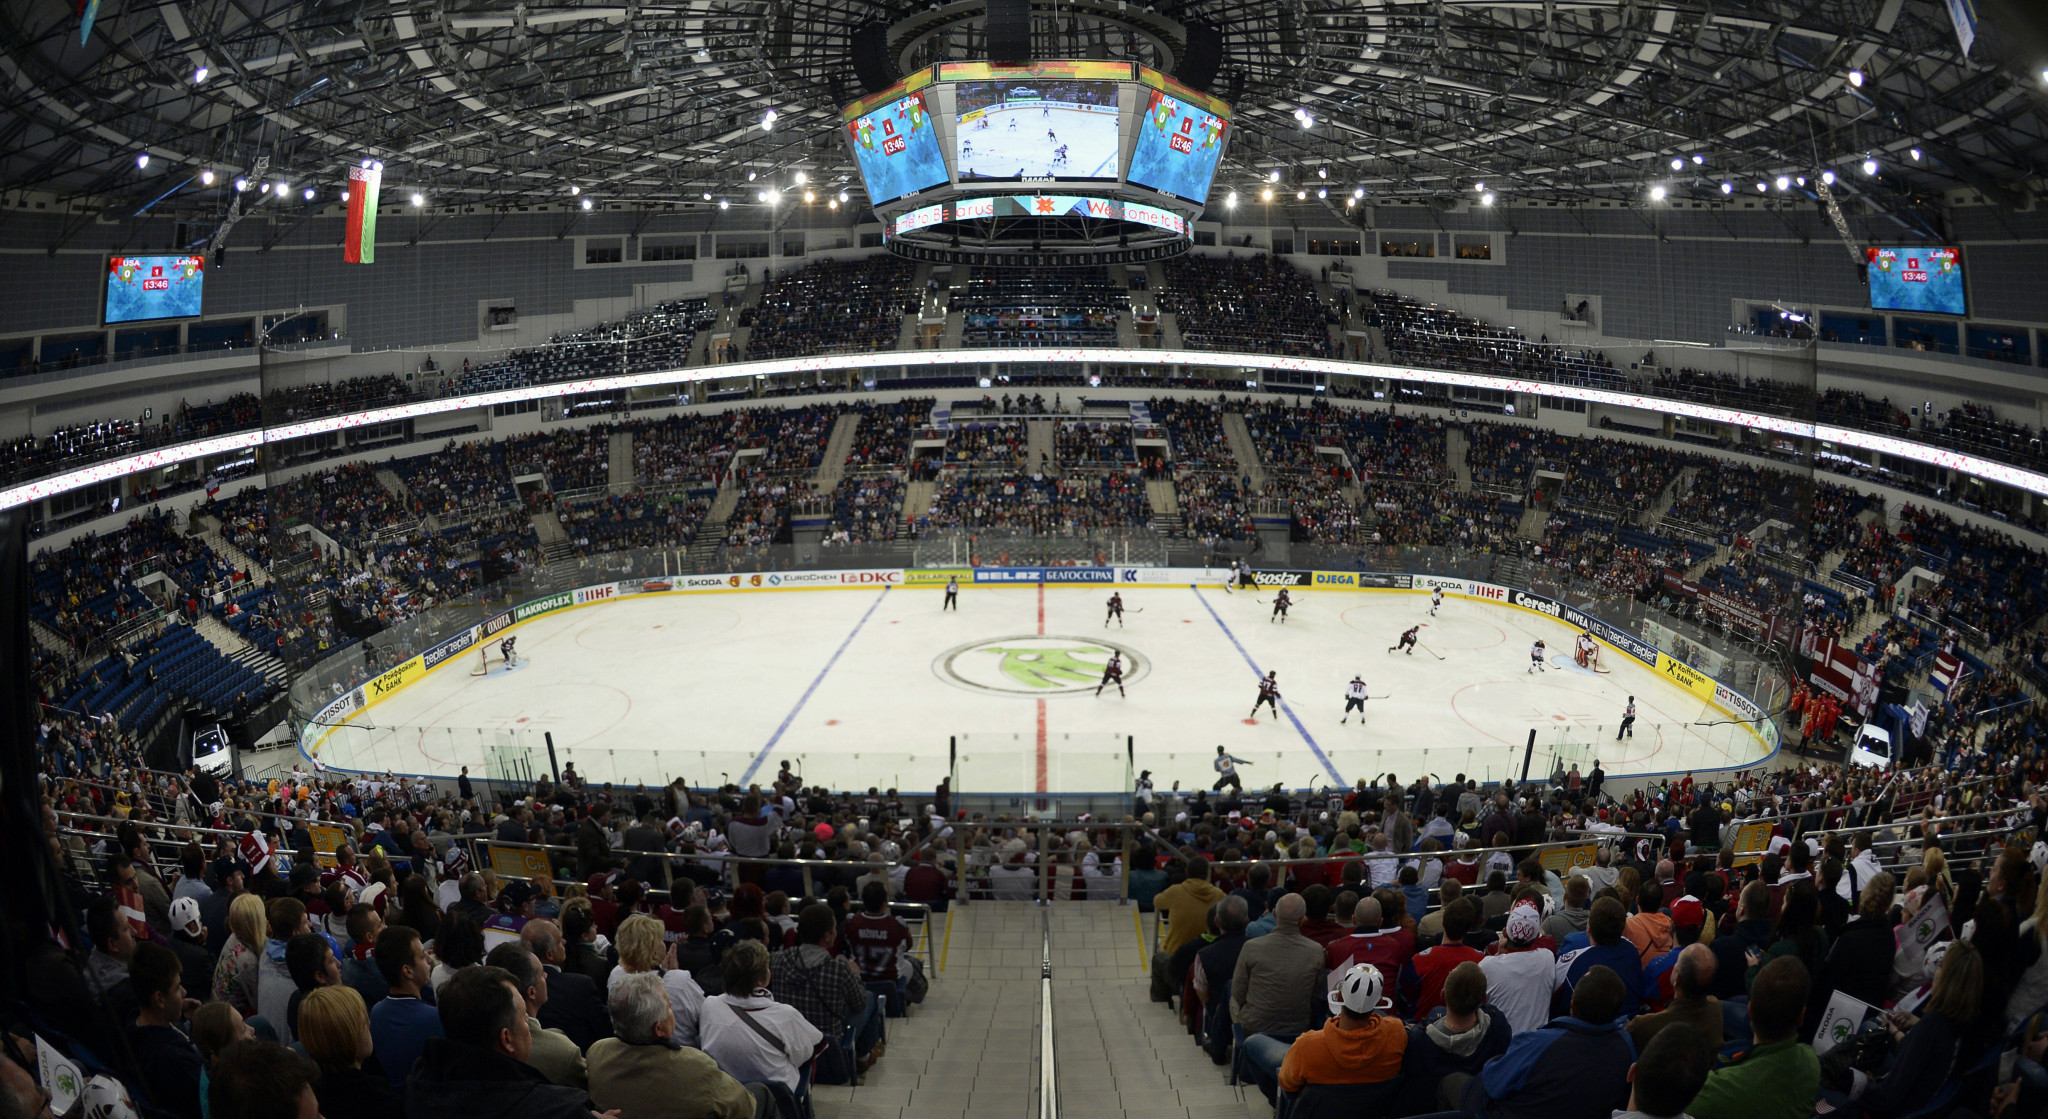 Belarus, which had been due to host last year's men's World Championship before it was moved to Latvia, accused the IIHF of violating 